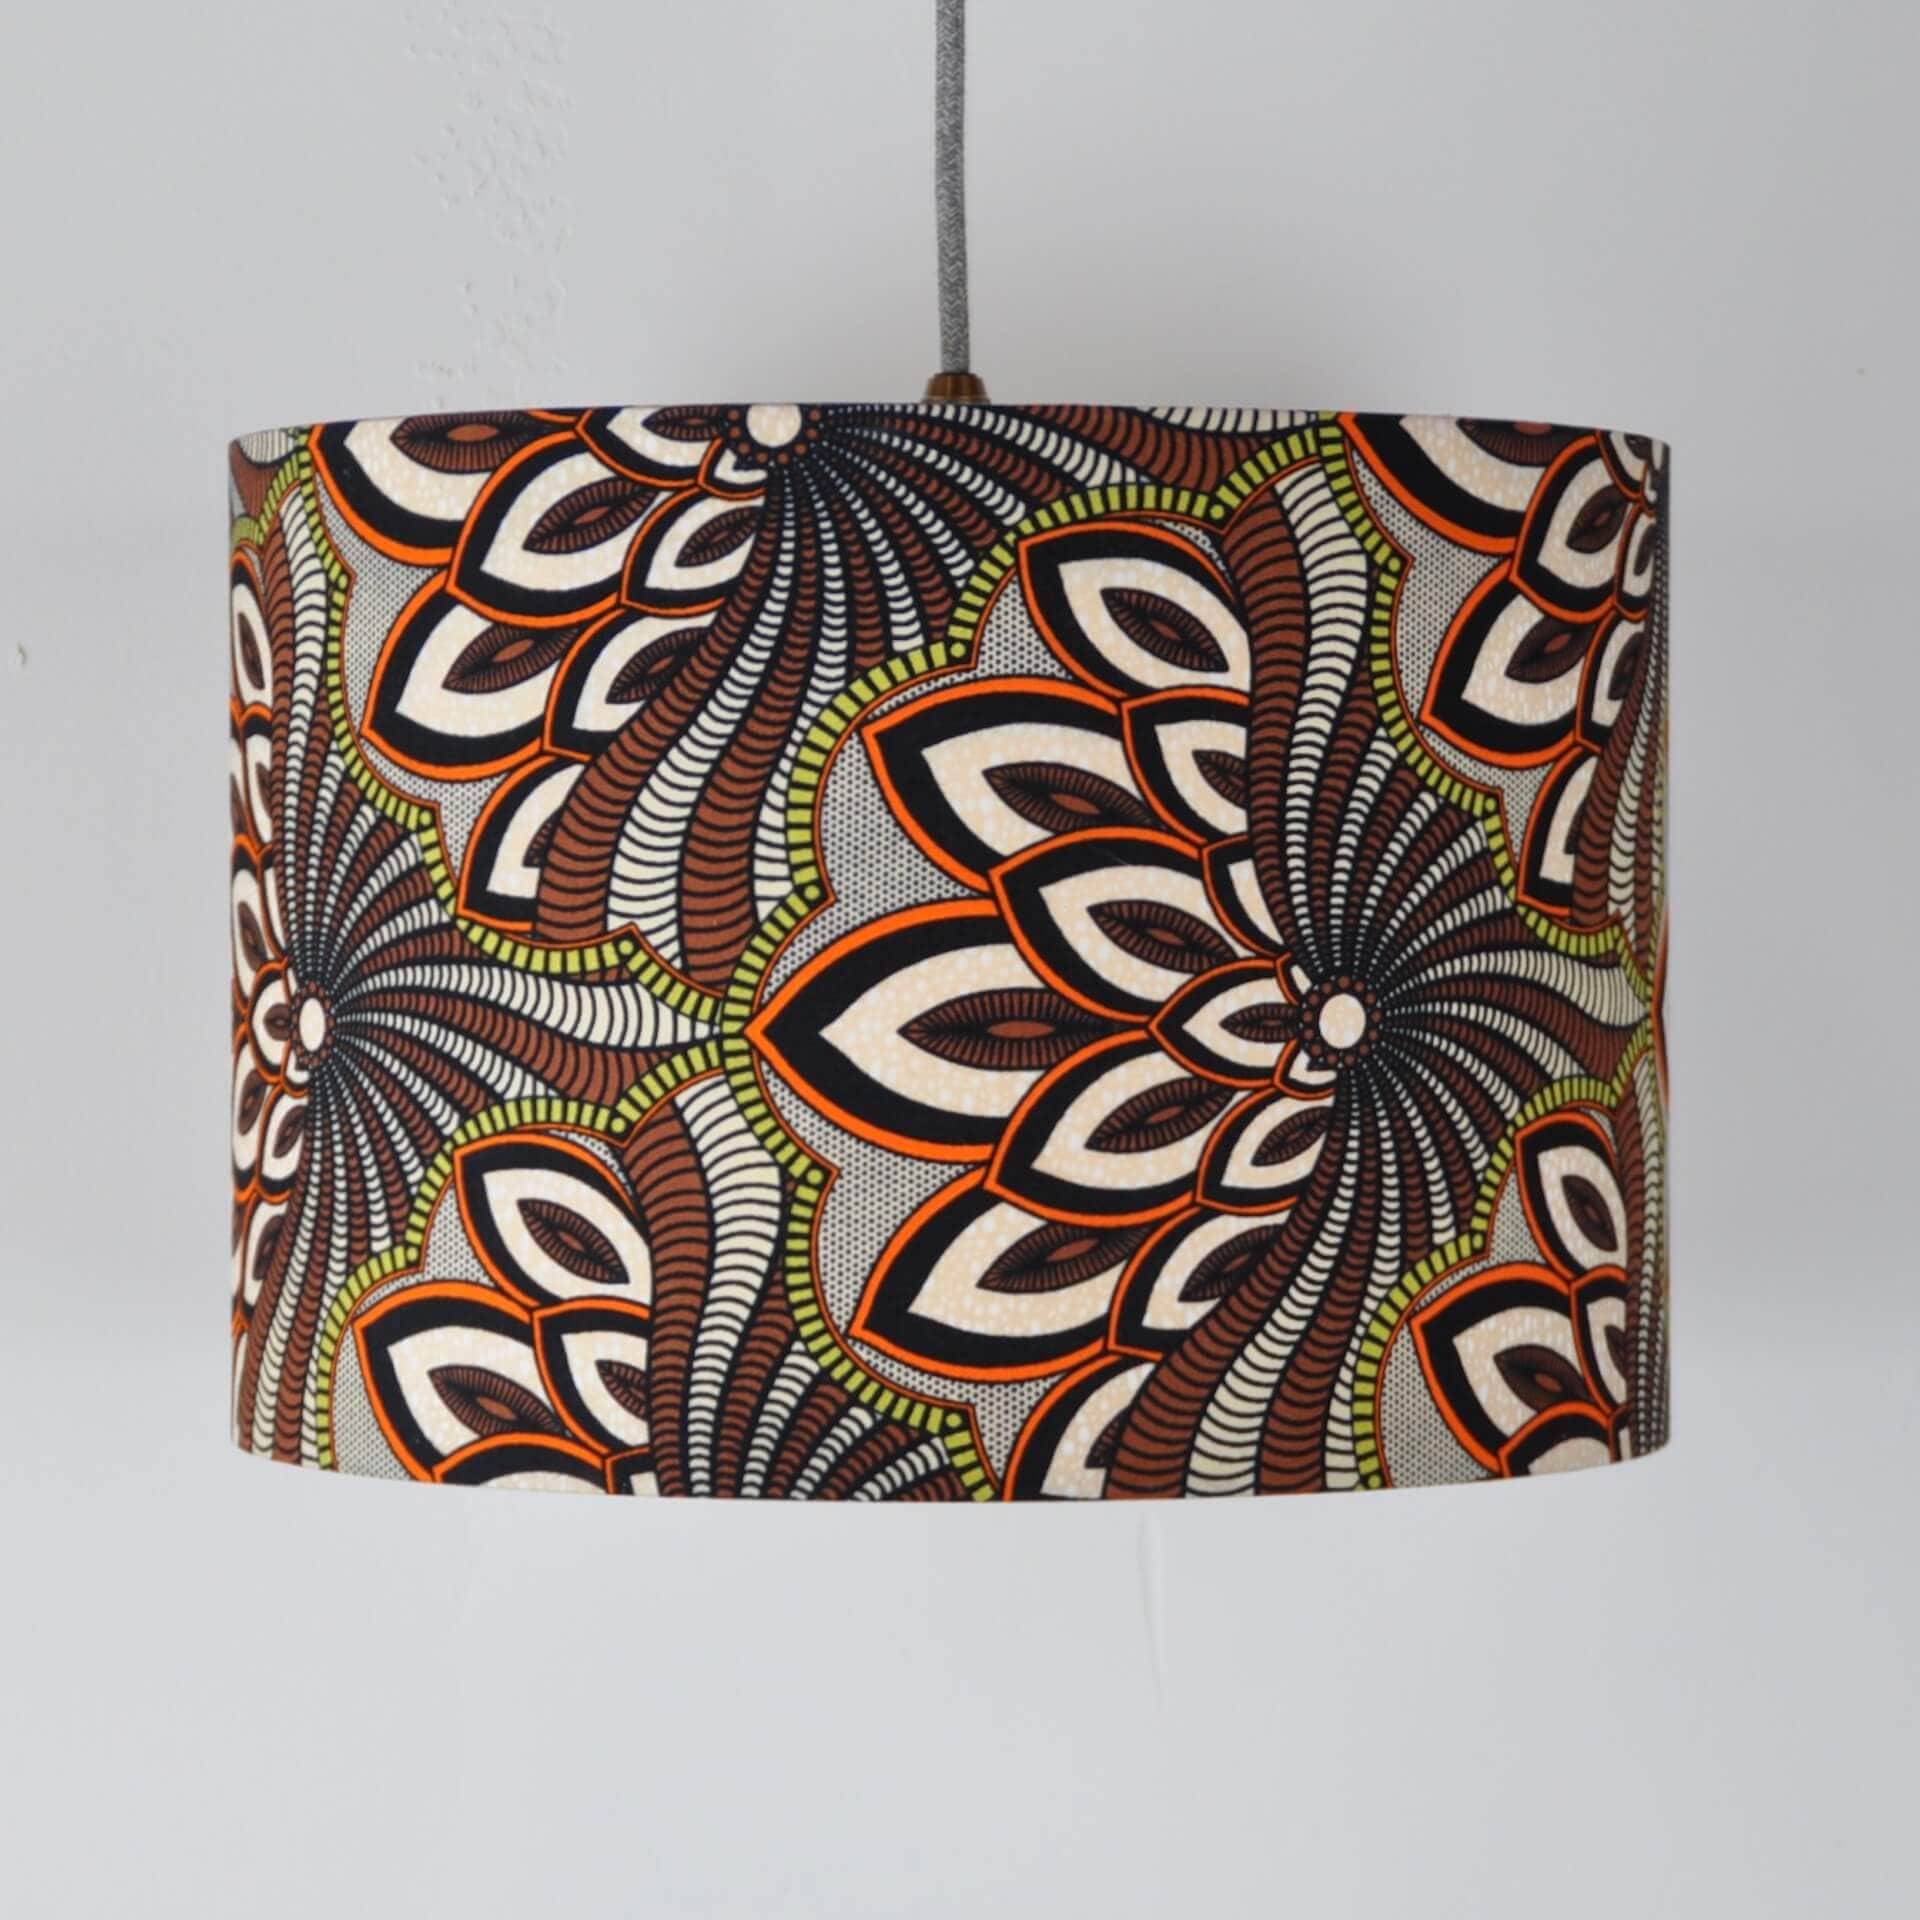 Colourful Shadez Bristol ⌀ 35cm x H24cm African Print Lampshade - Brown Peacock Feather (various sizes)